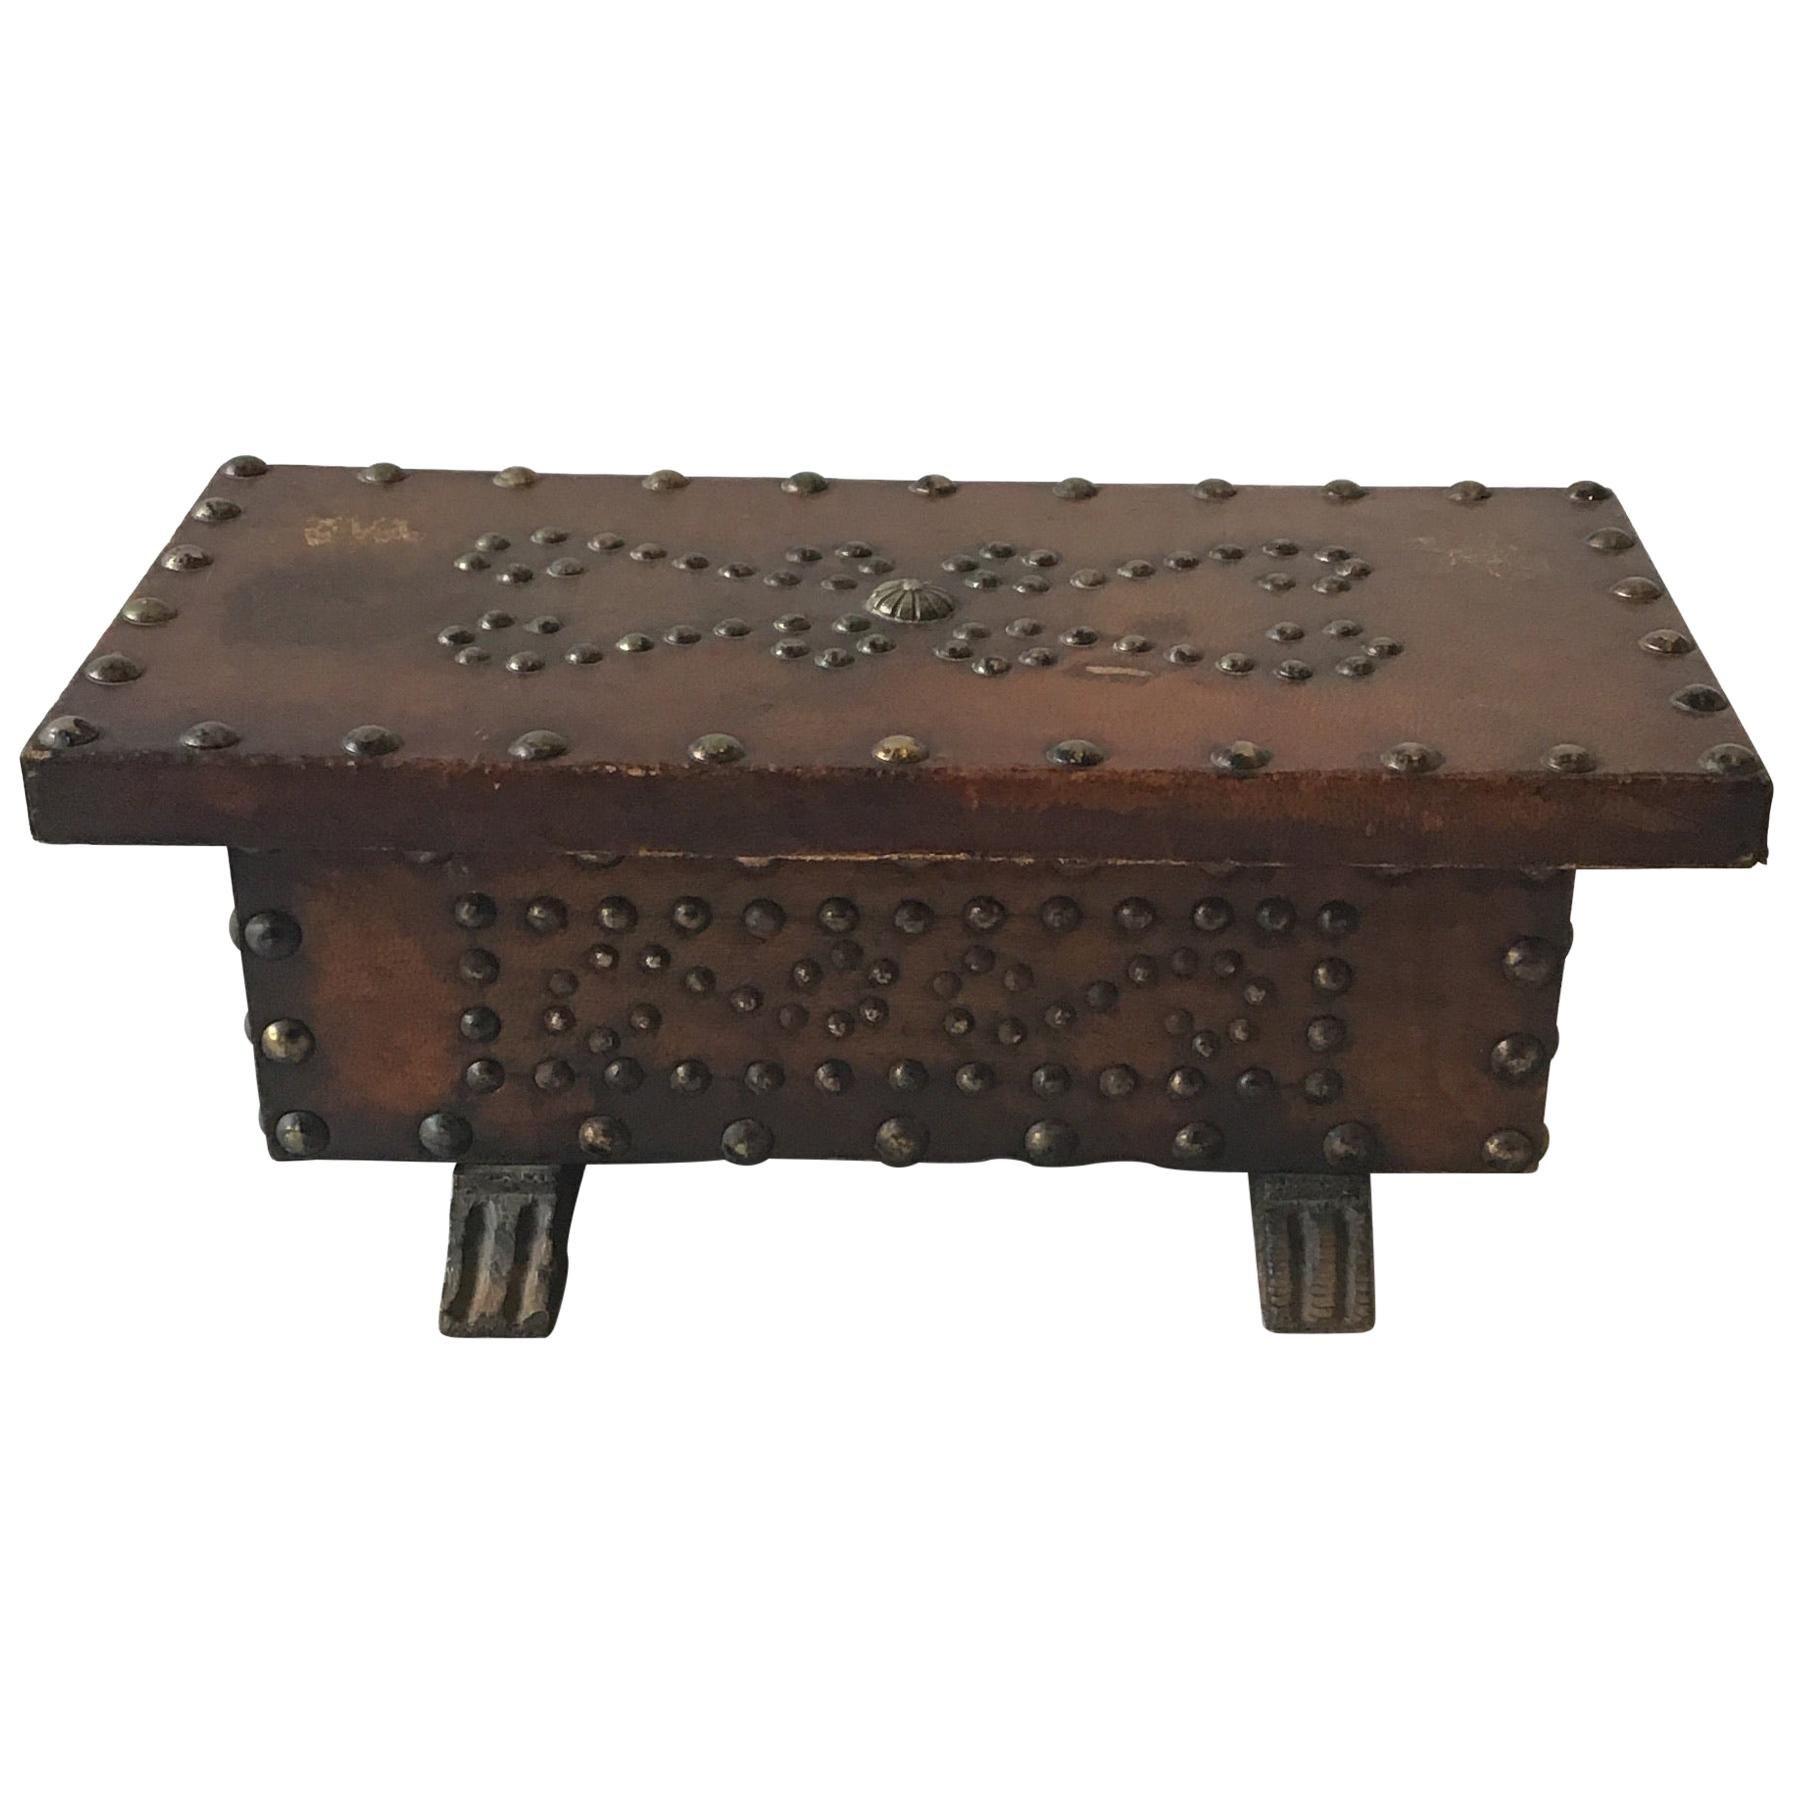 1960s Leather Studded Wood Box For Sale